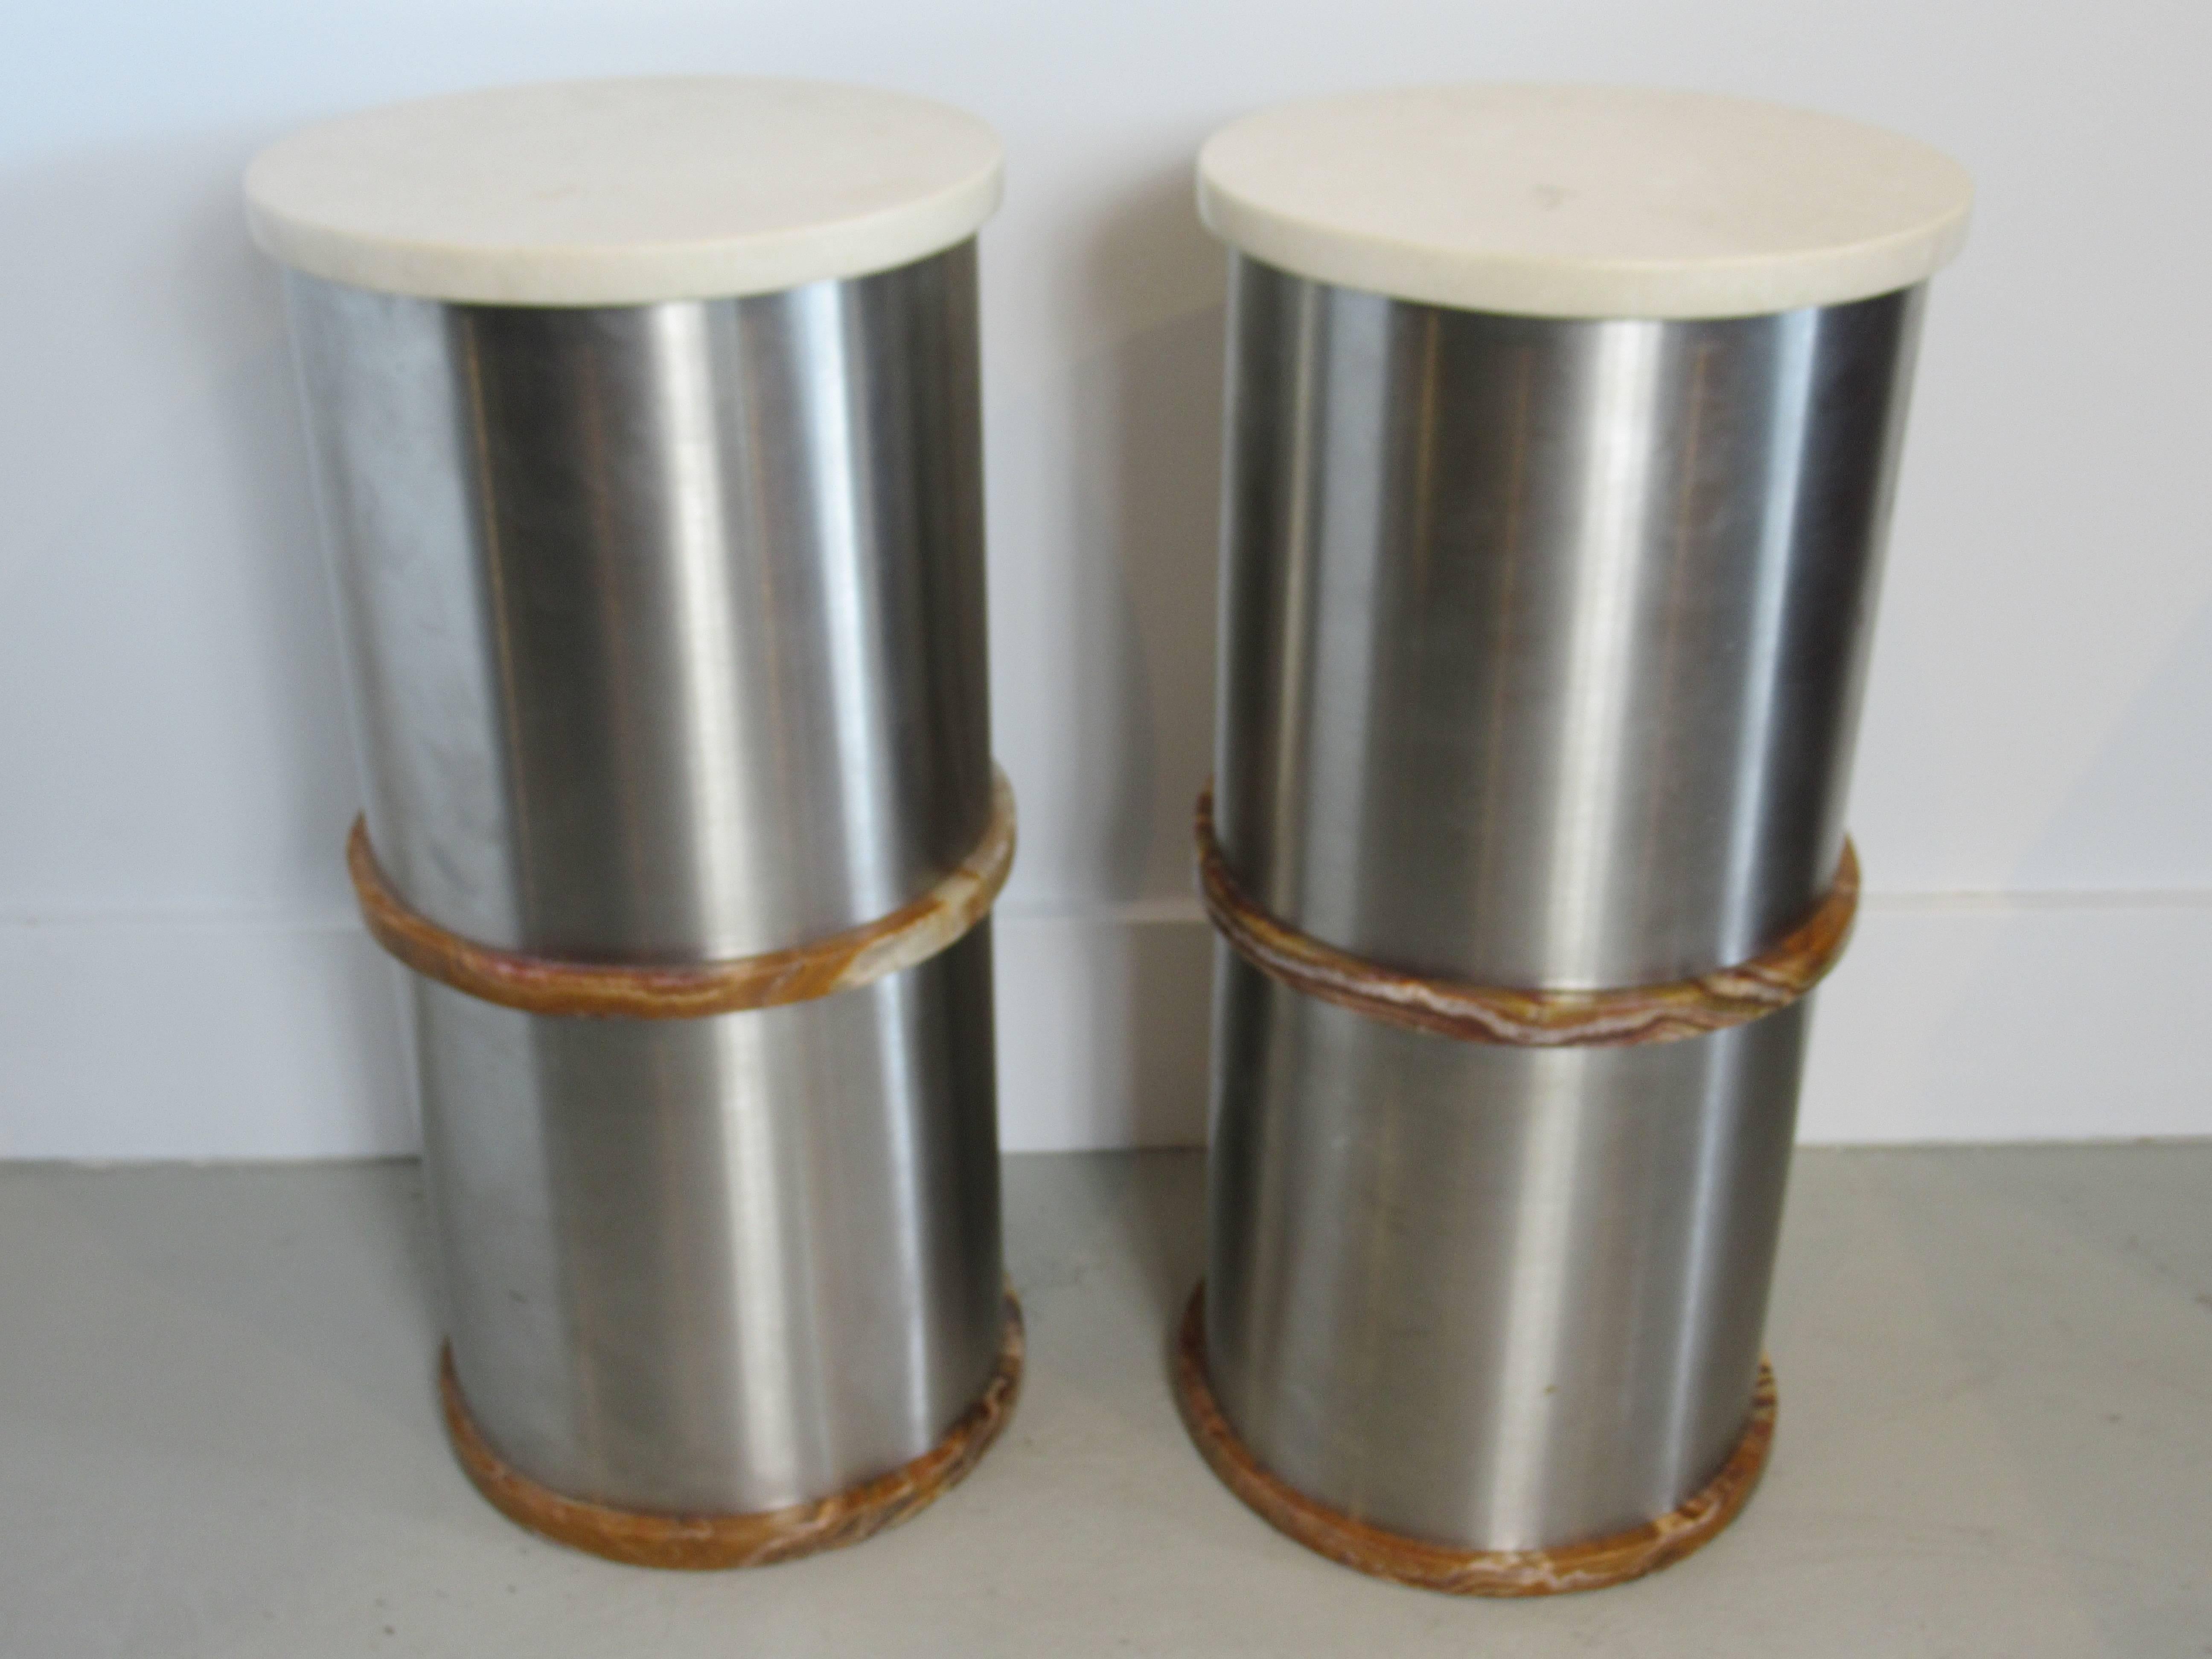 Pair of Italian Modern Stainless Steel Travertine and Onyx Side Tables, Saporiti 3